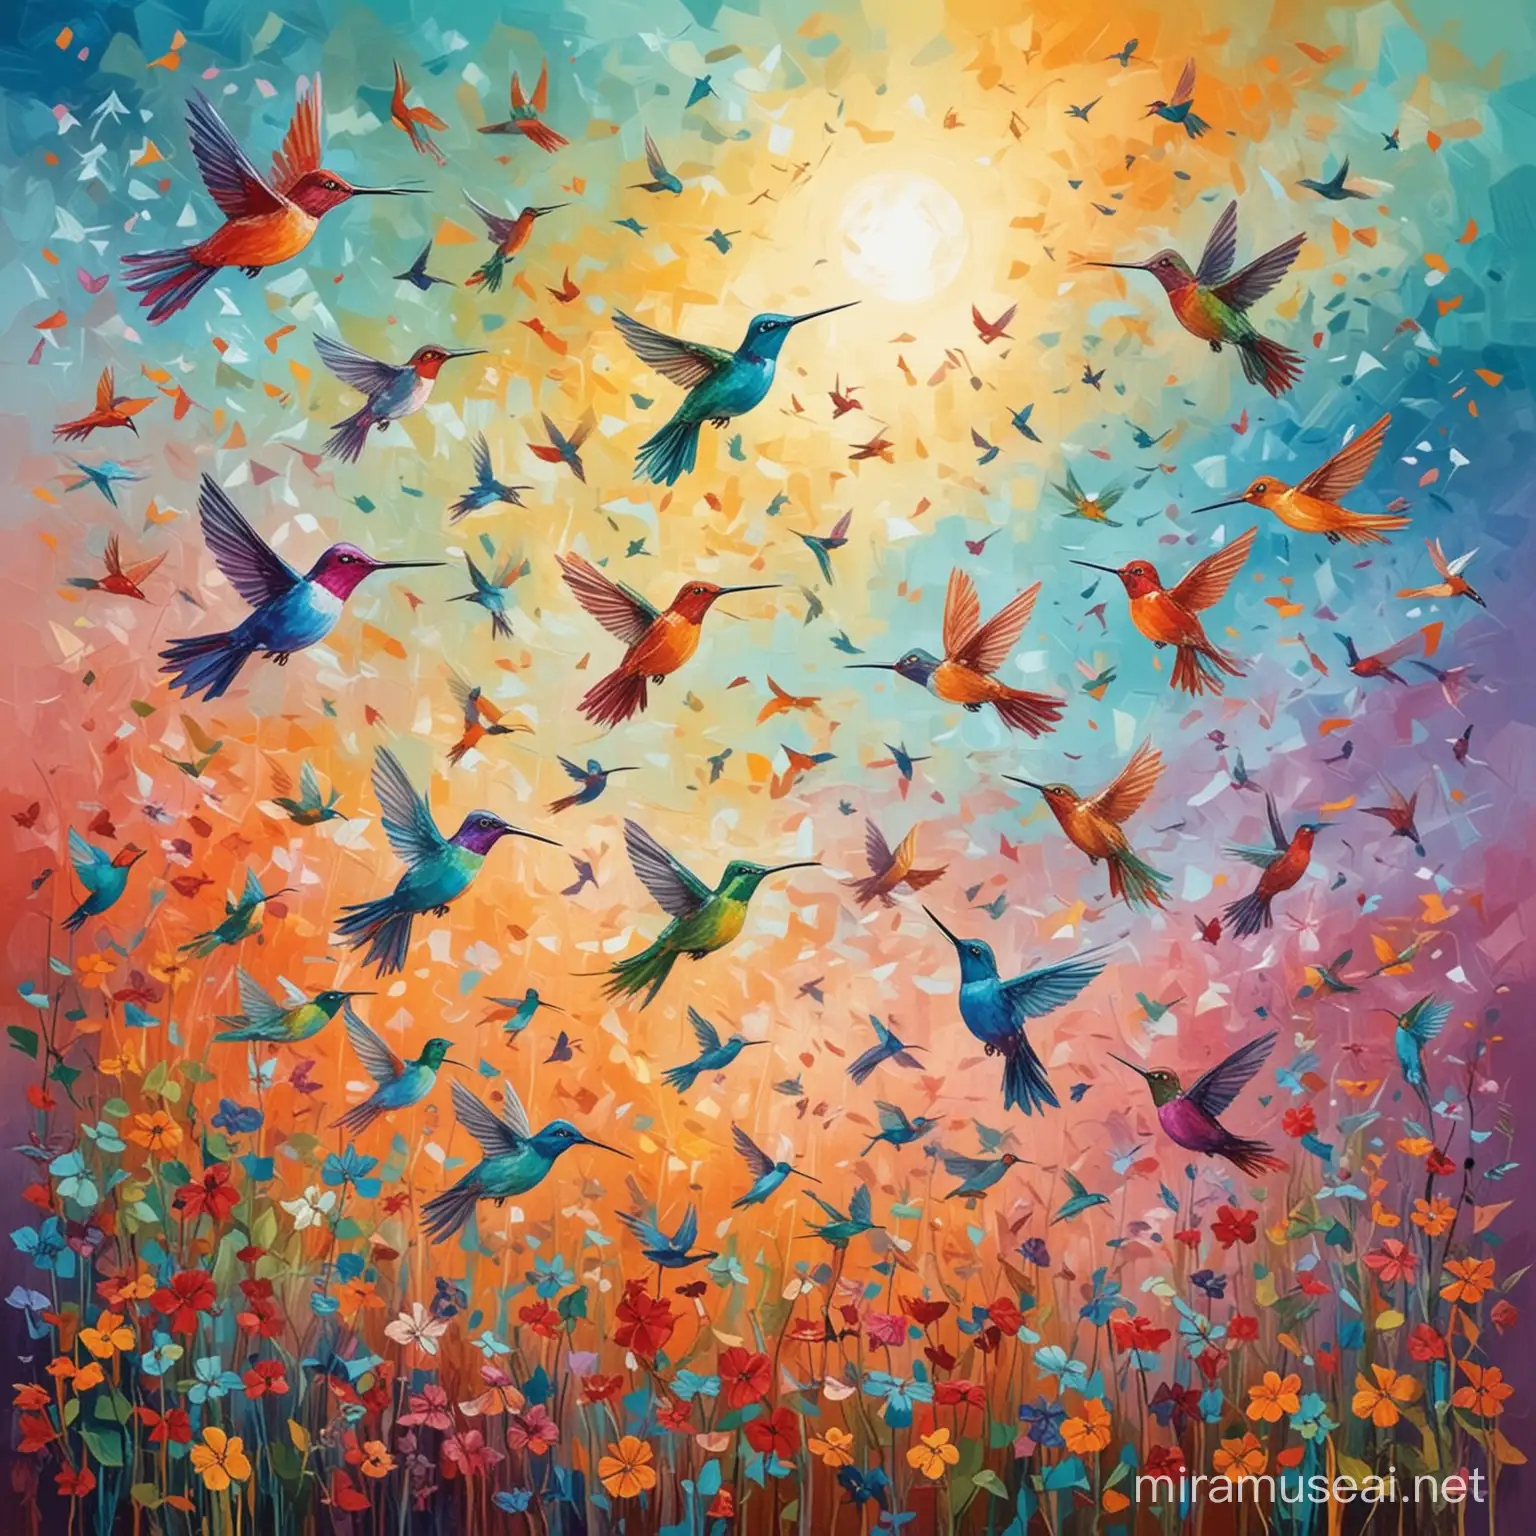 Colorful Abstract Folk Art Hummingbirds Flying in the Sky